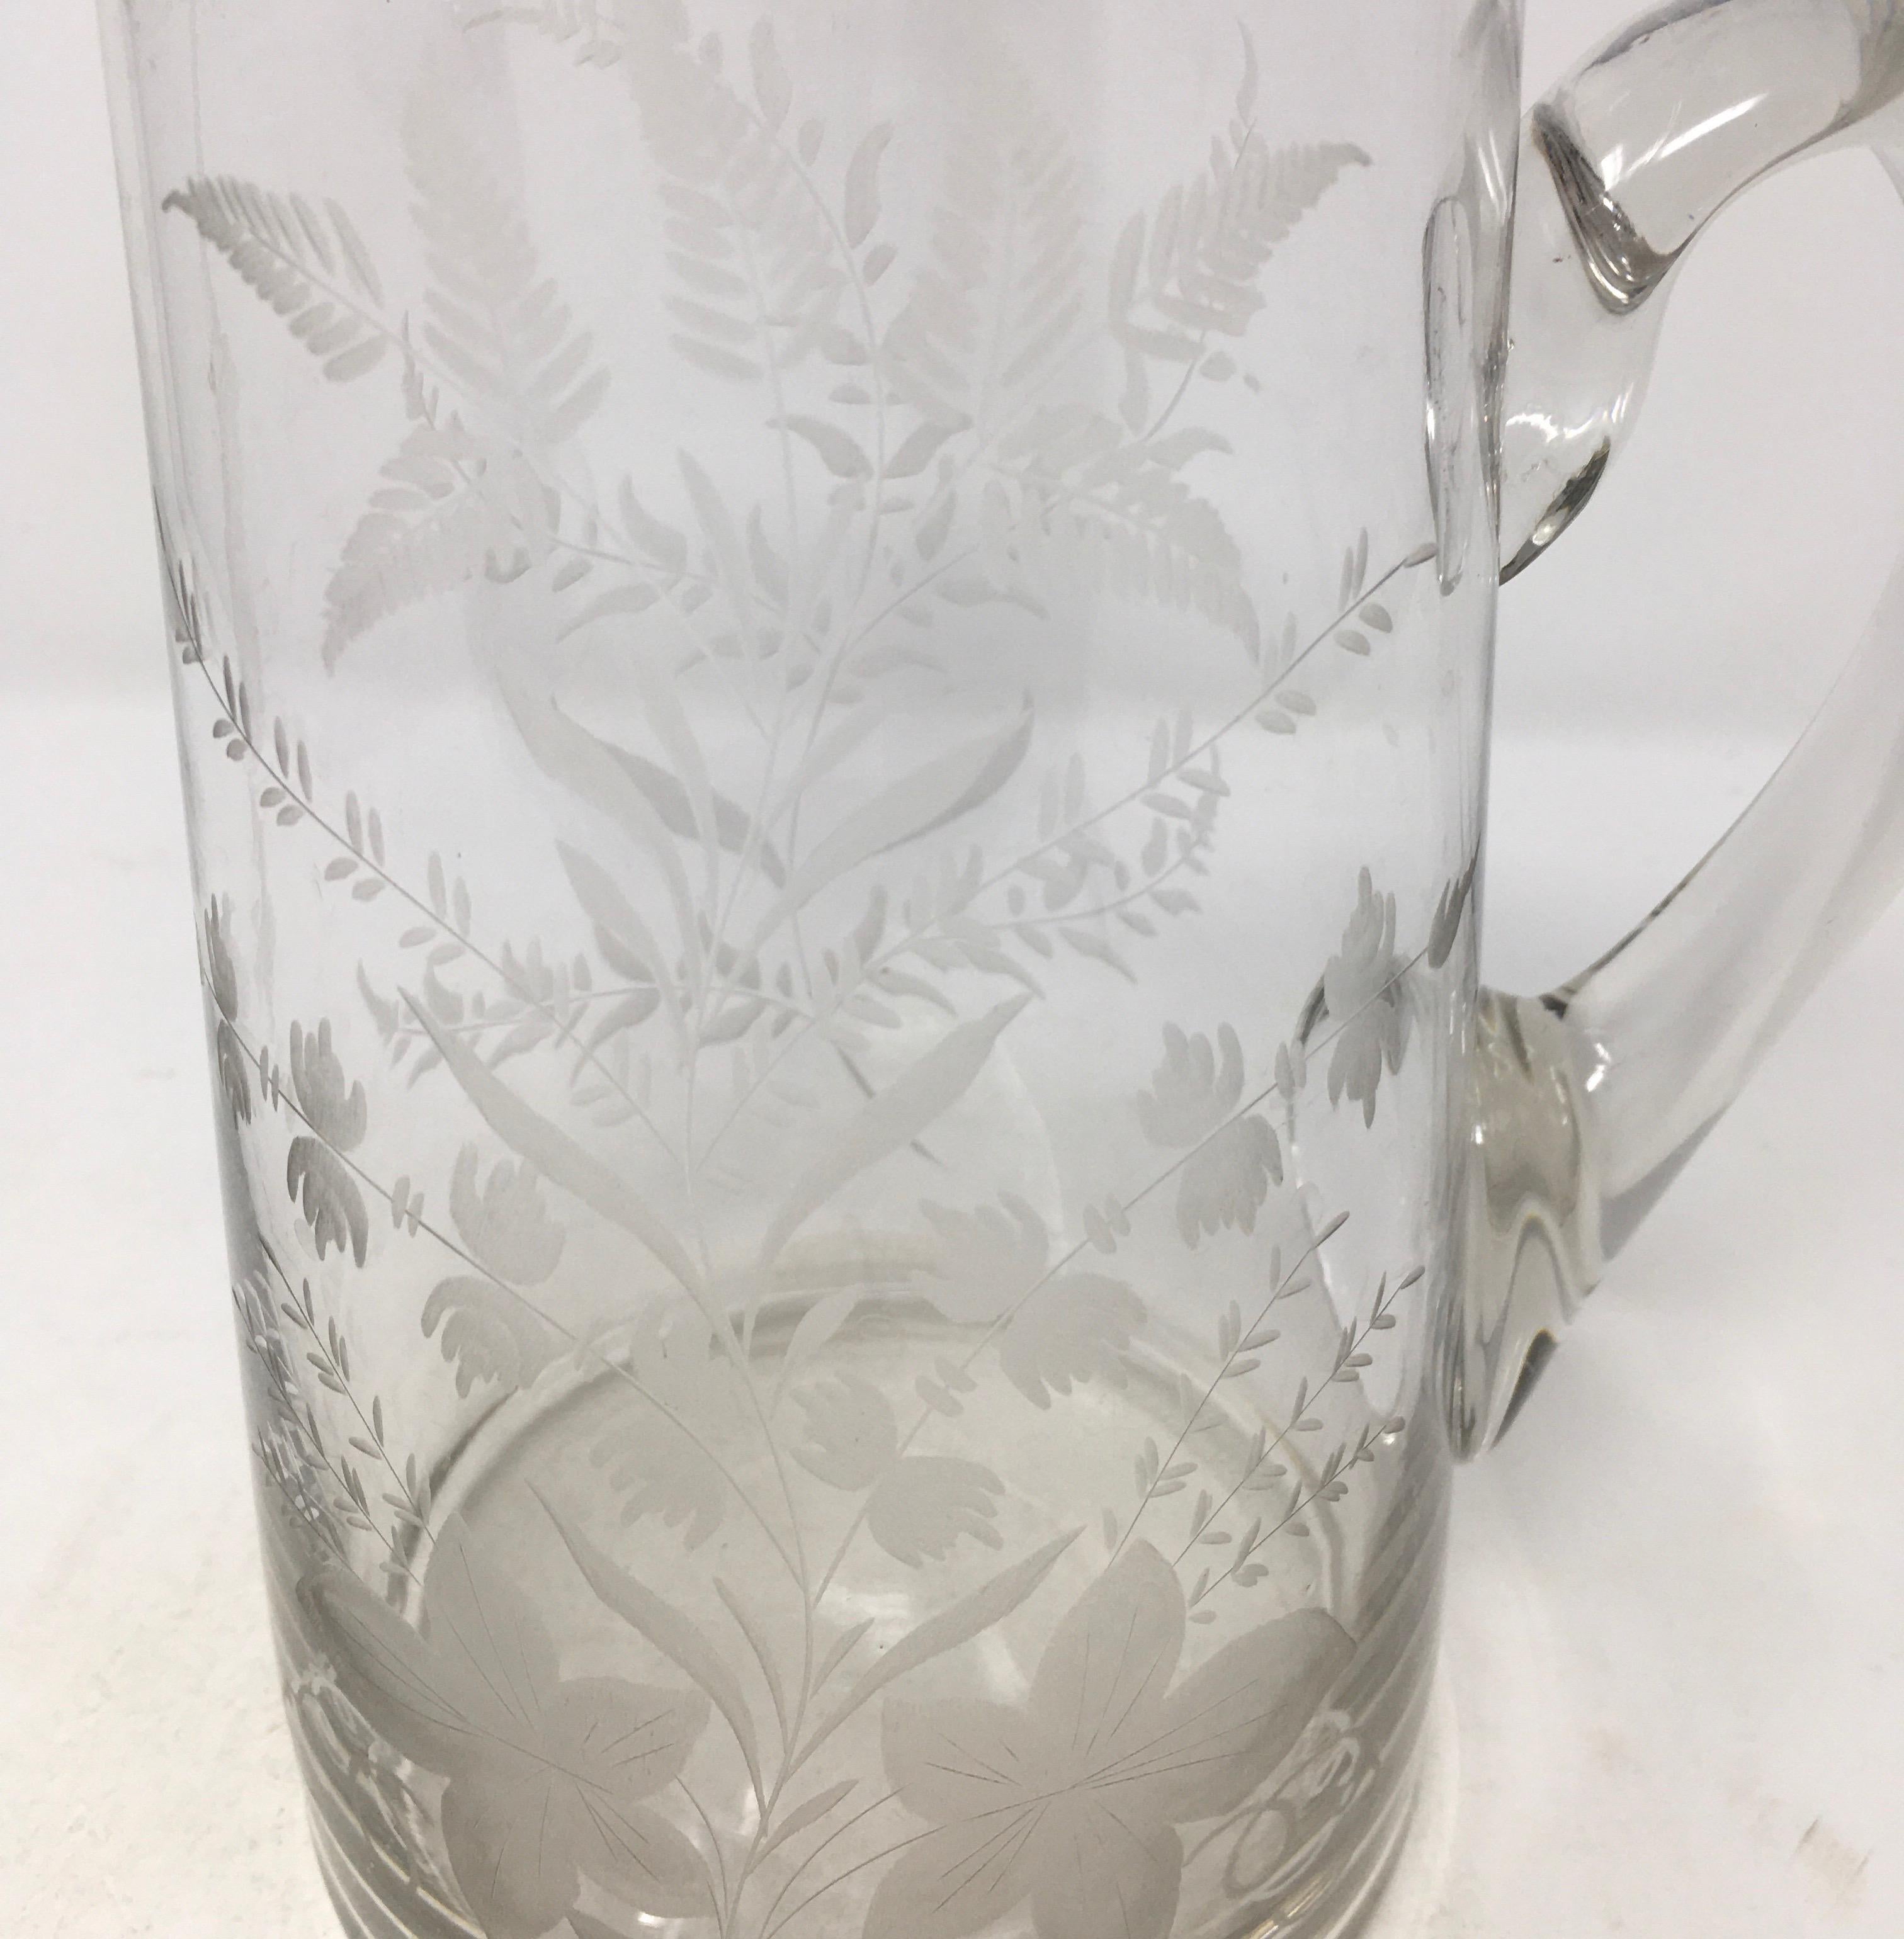 This is a beautiful English etched glass pitcher. The pitcher features intricate etched-glass work with flowers and ferns. A lovely piece for bedside or on the table.

This piece weighs 2 lbs.